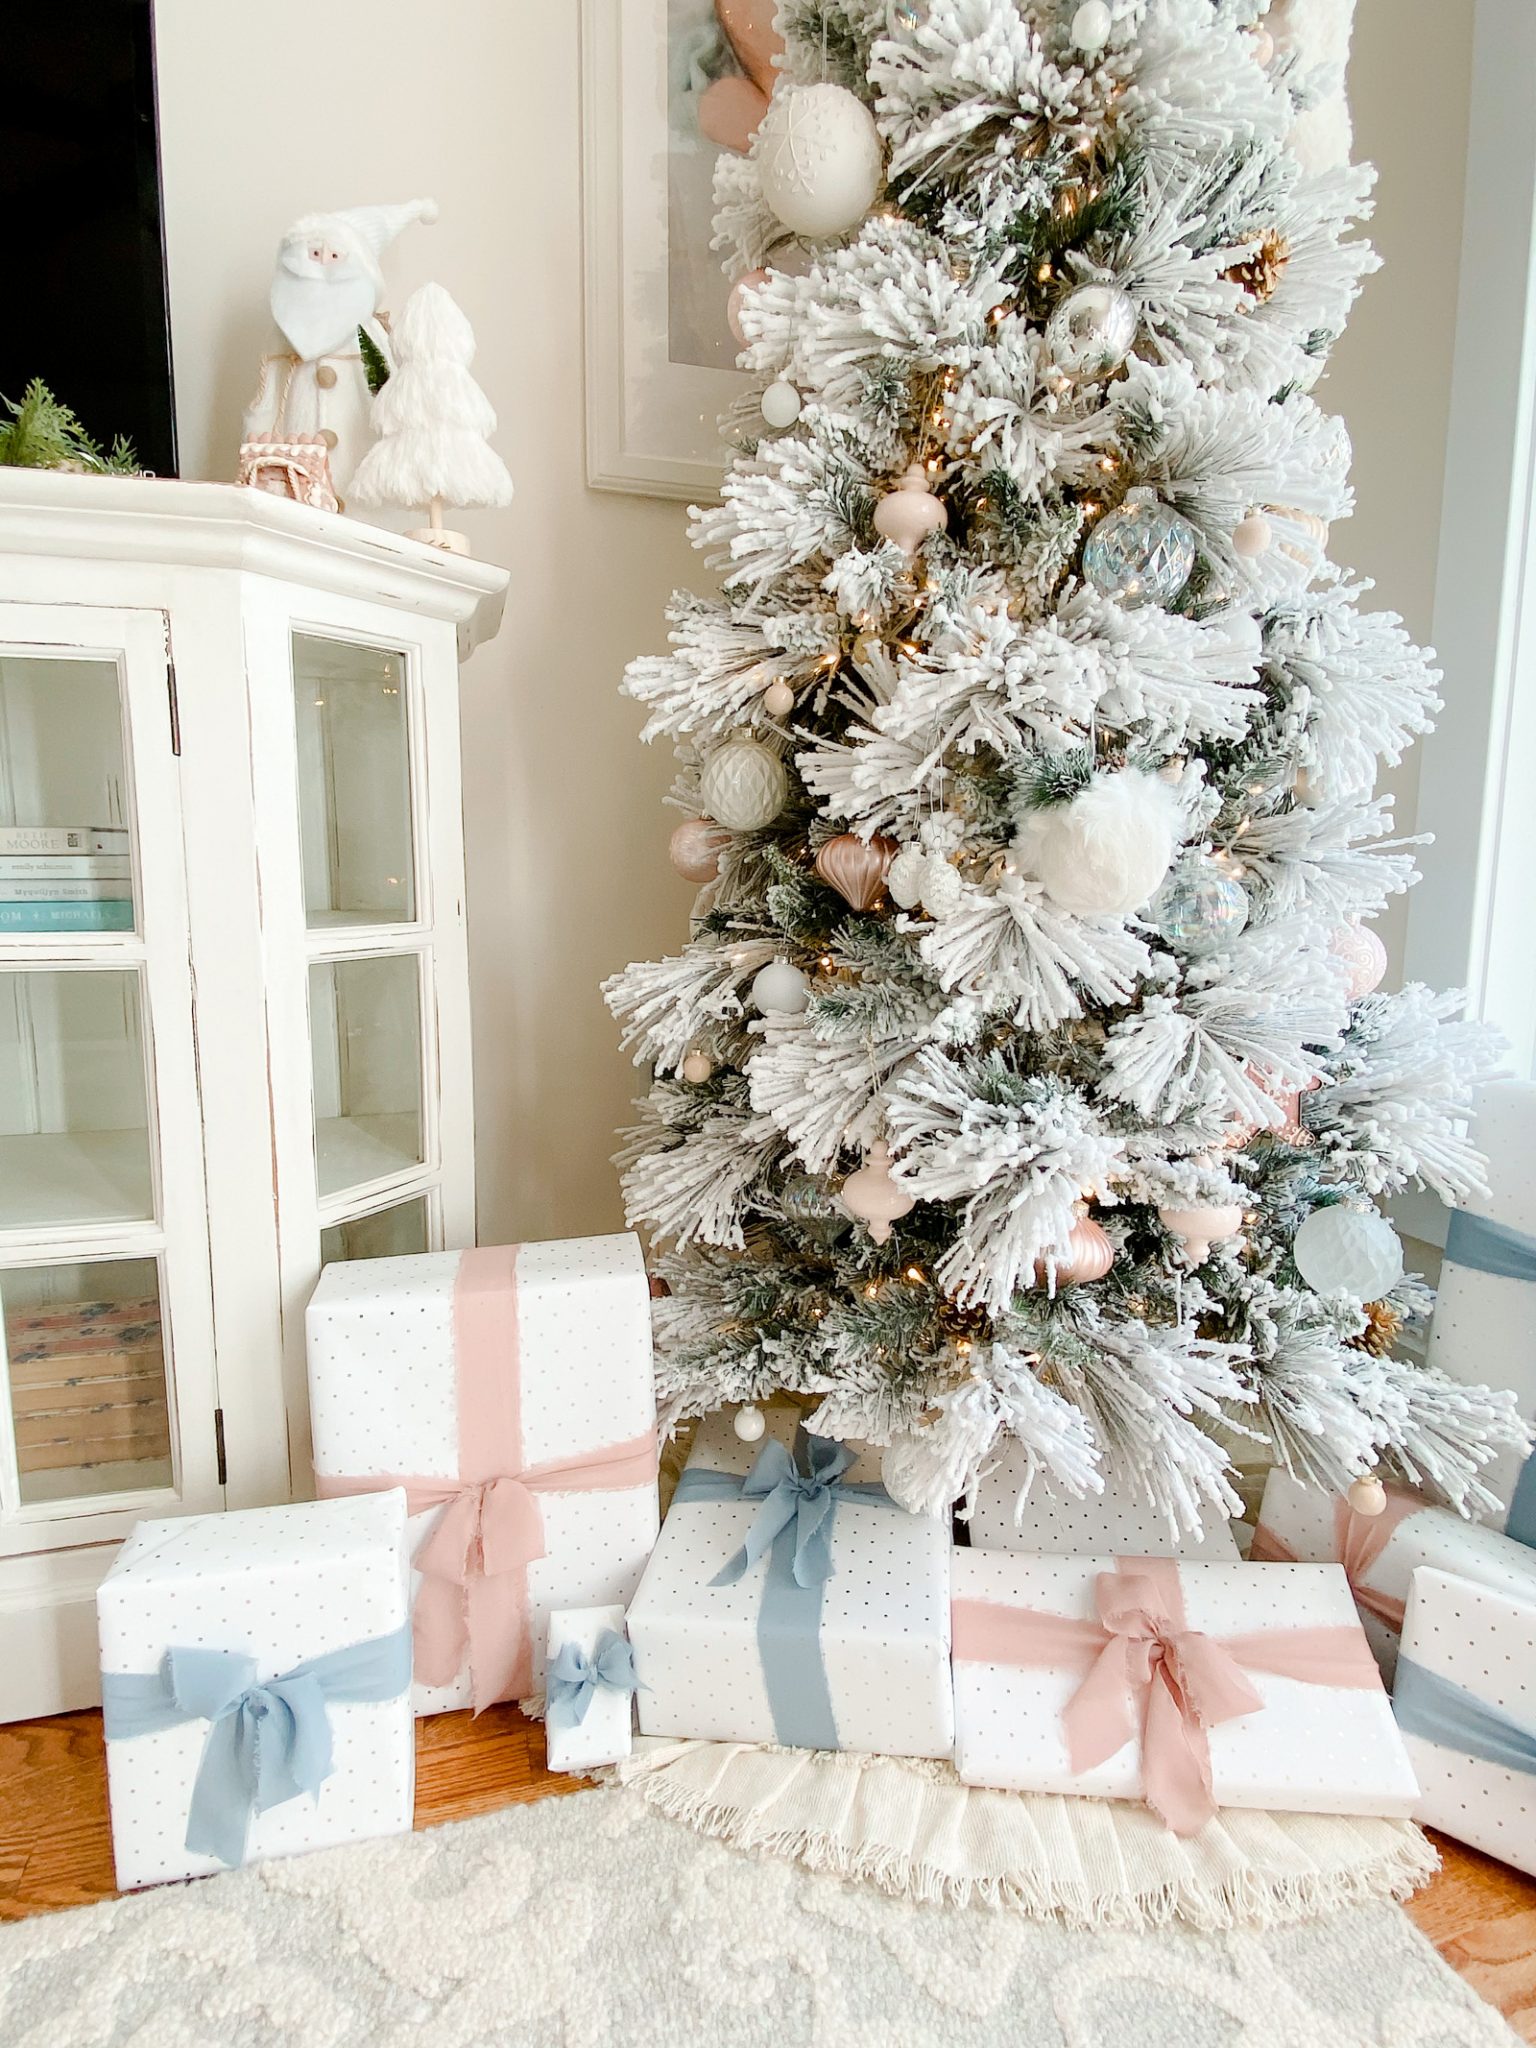 A Simple Christmas | How to make gifts, wrapping, and the season ...